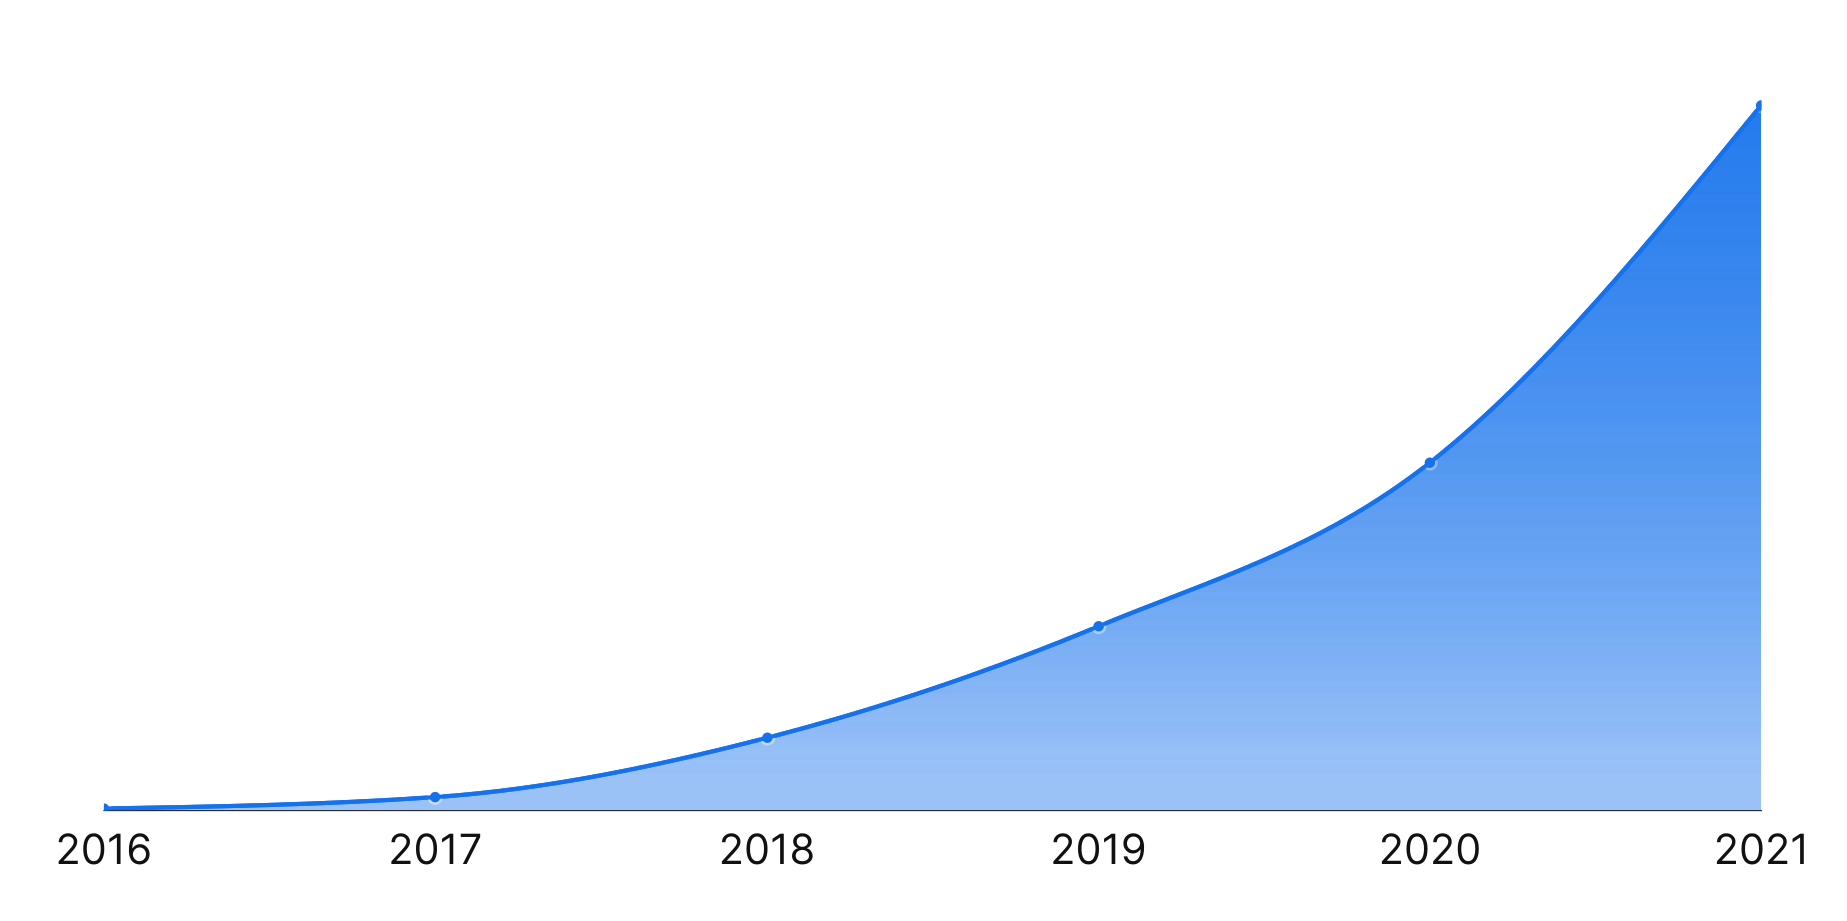 graph representing Apify's revenue growth from 2016-2021